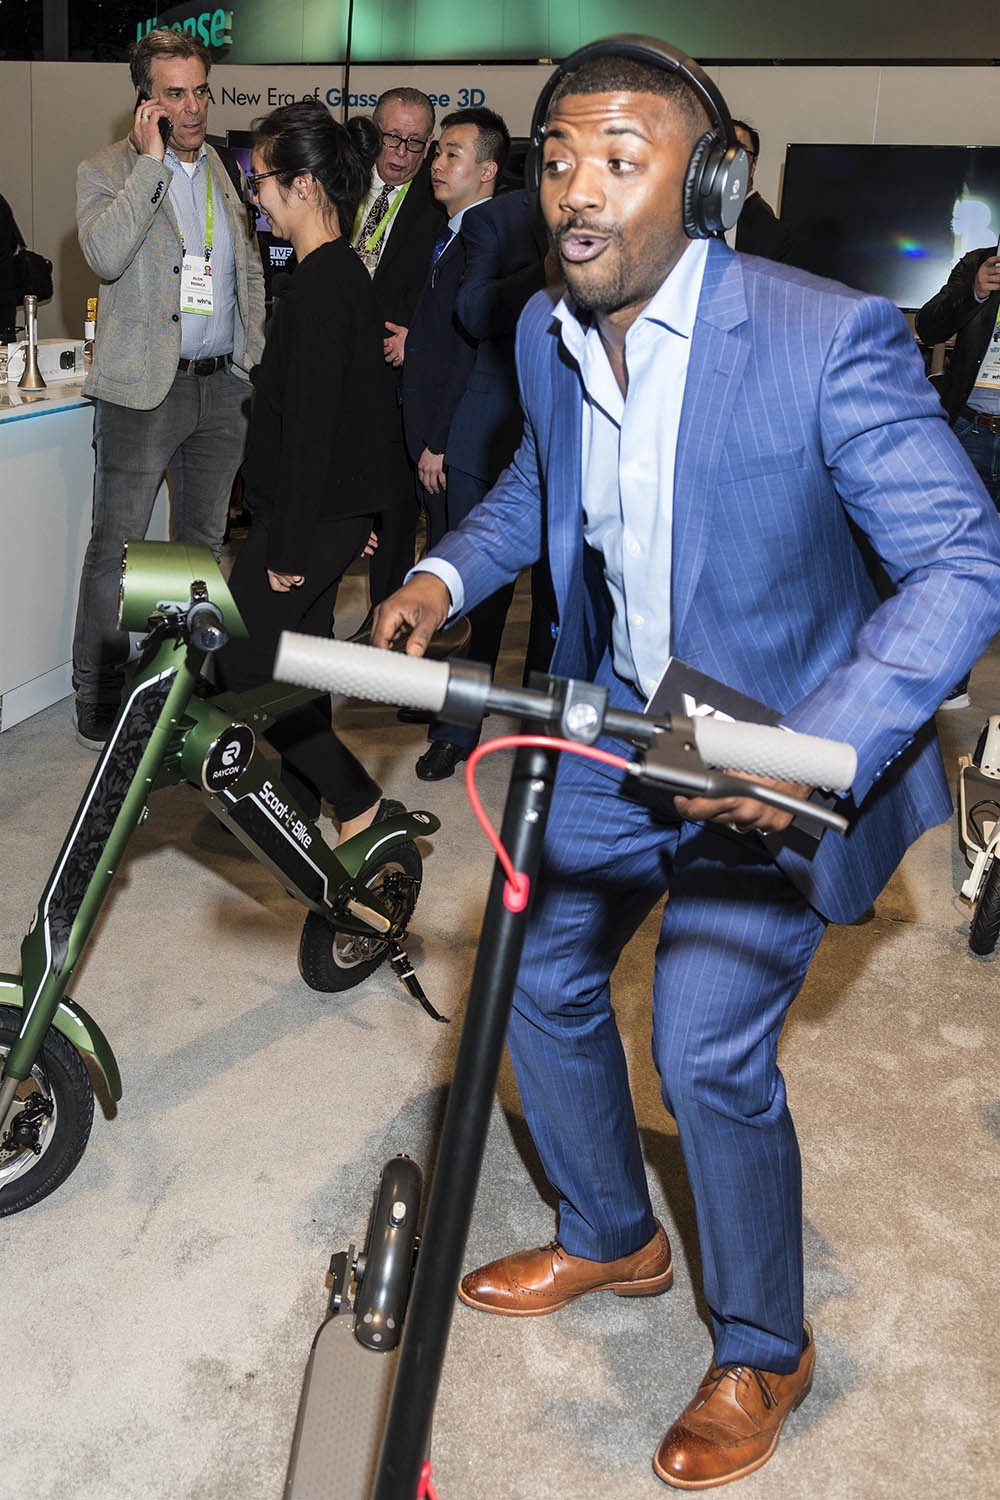 Ray J and Princess Love at CES 2018 in Las Vegas